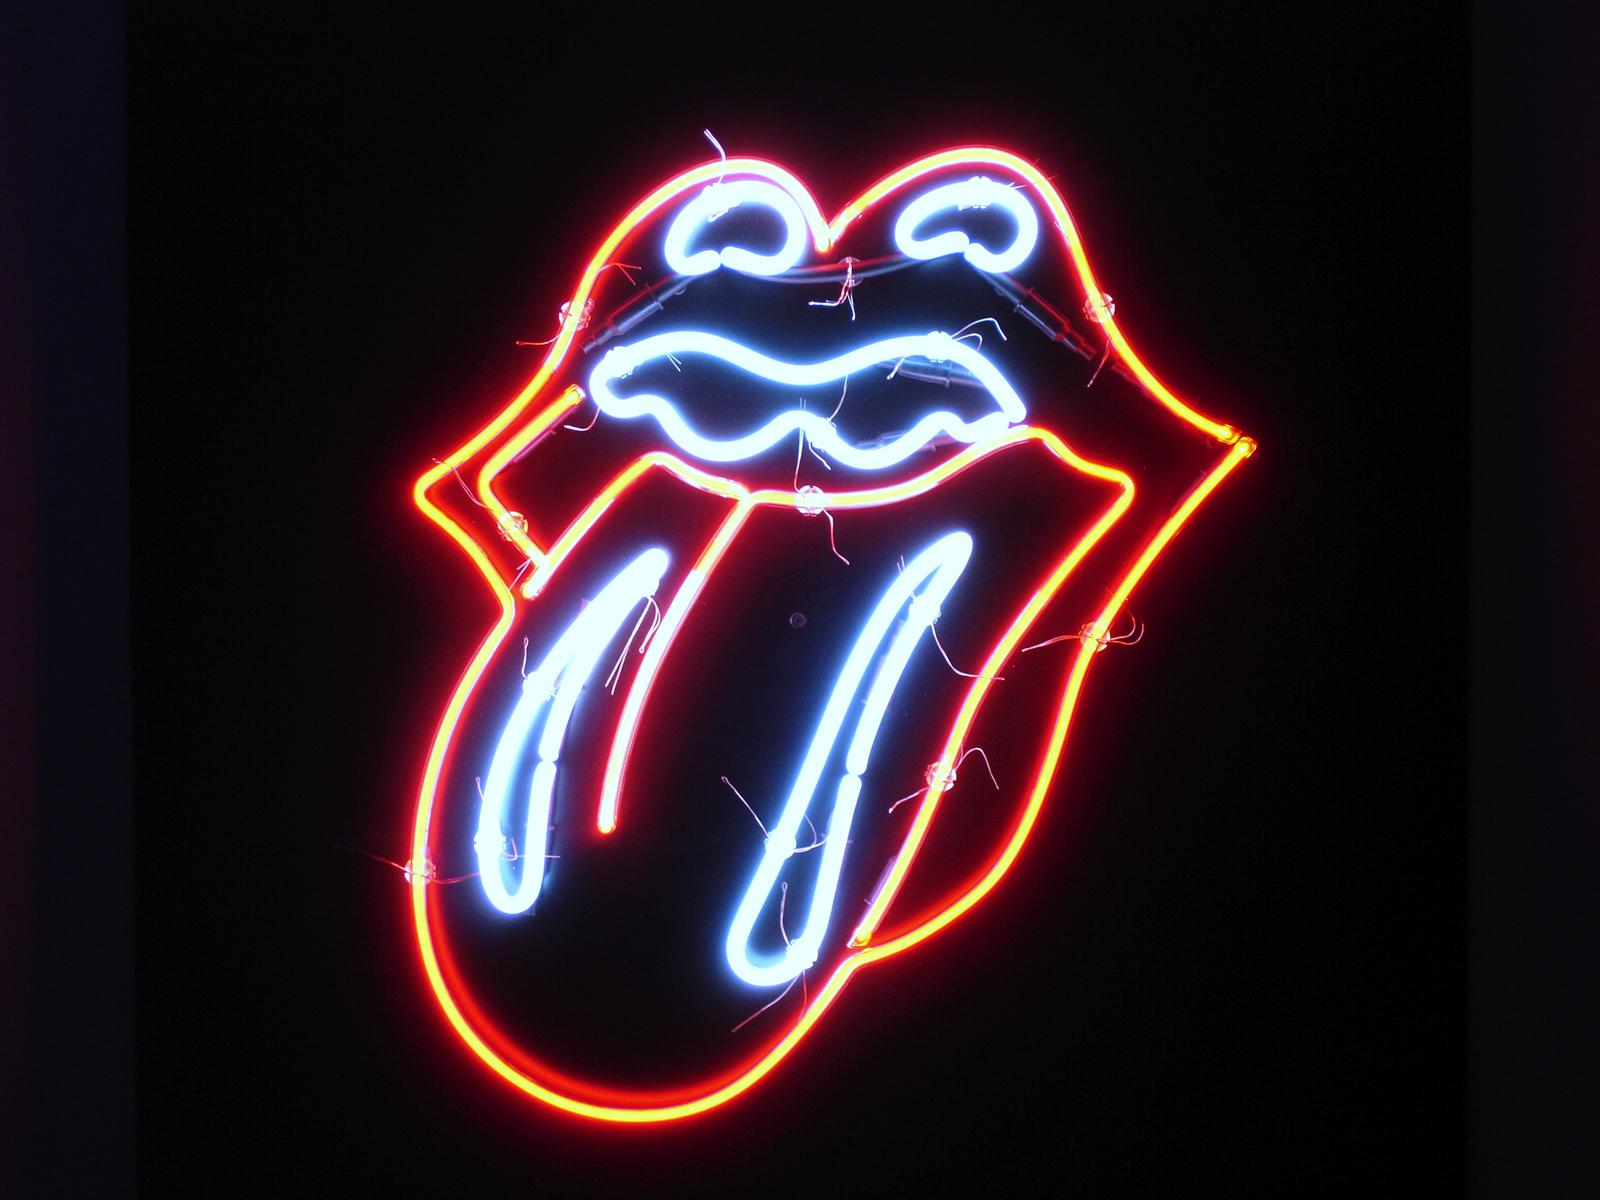 Rolling Stones lips and tongue logo by Jon Pasche 1970 1600x1200